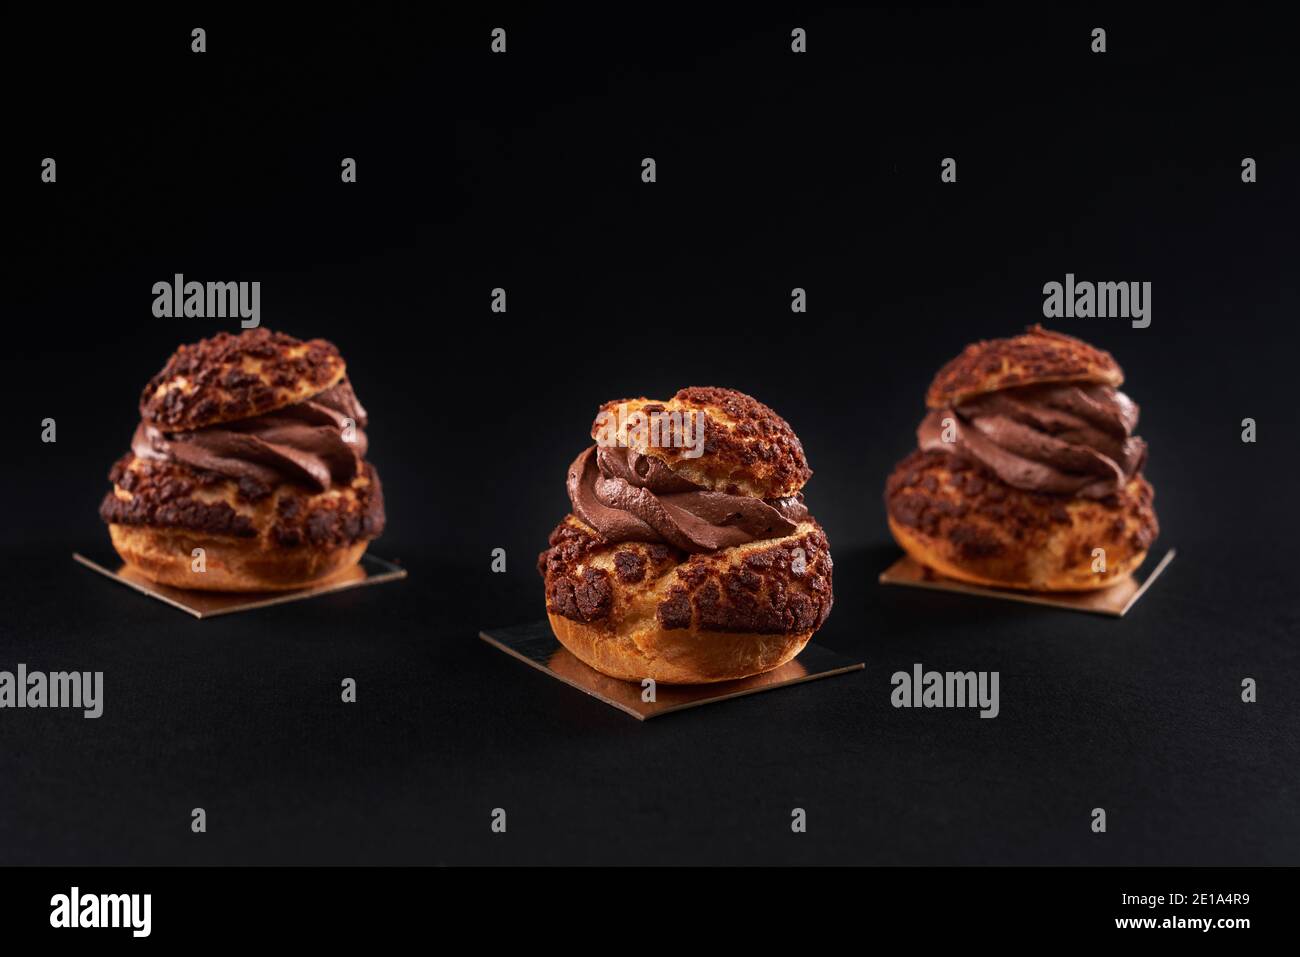 Three delicious fresh crunchy profiteroles with sweet brown chocolate cream inside. Closeup of homemade tasty baked eclairs isolated on black background. Concept of desserts, restaurant food. Stock Photo